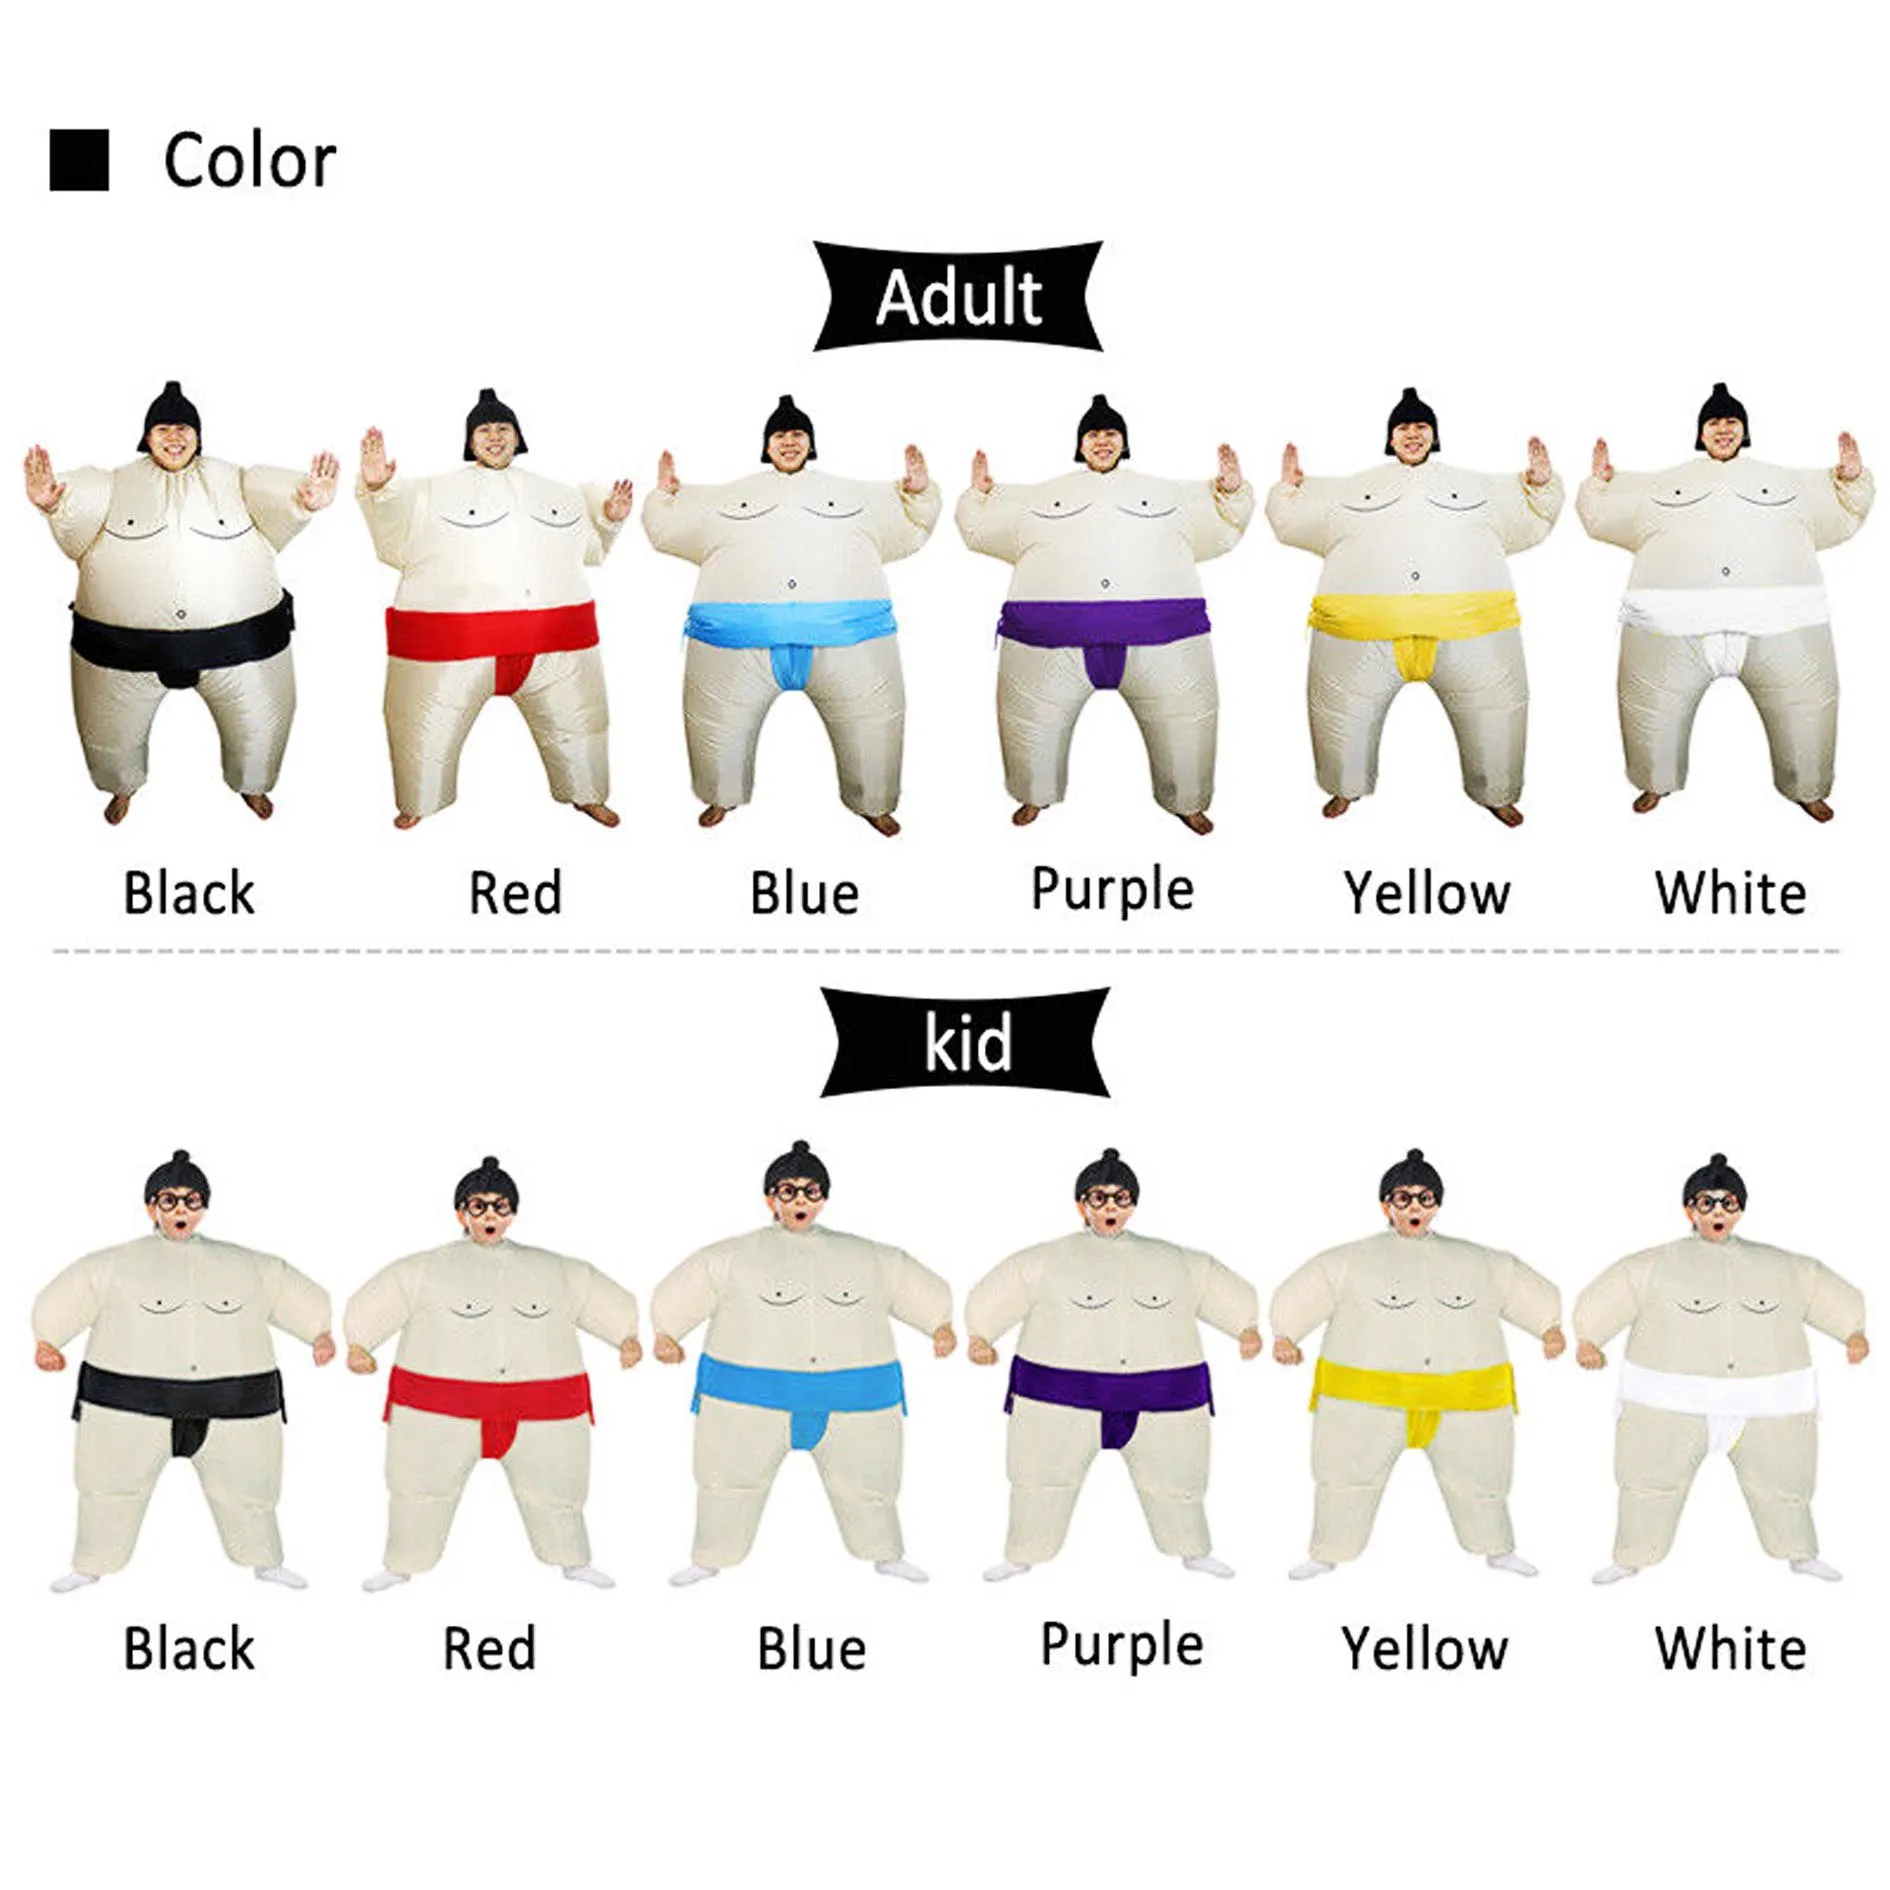 Sumo Wrestler Costume Inflatable Suit Blow Up Party Outfit Cosplay Dress Kid Men